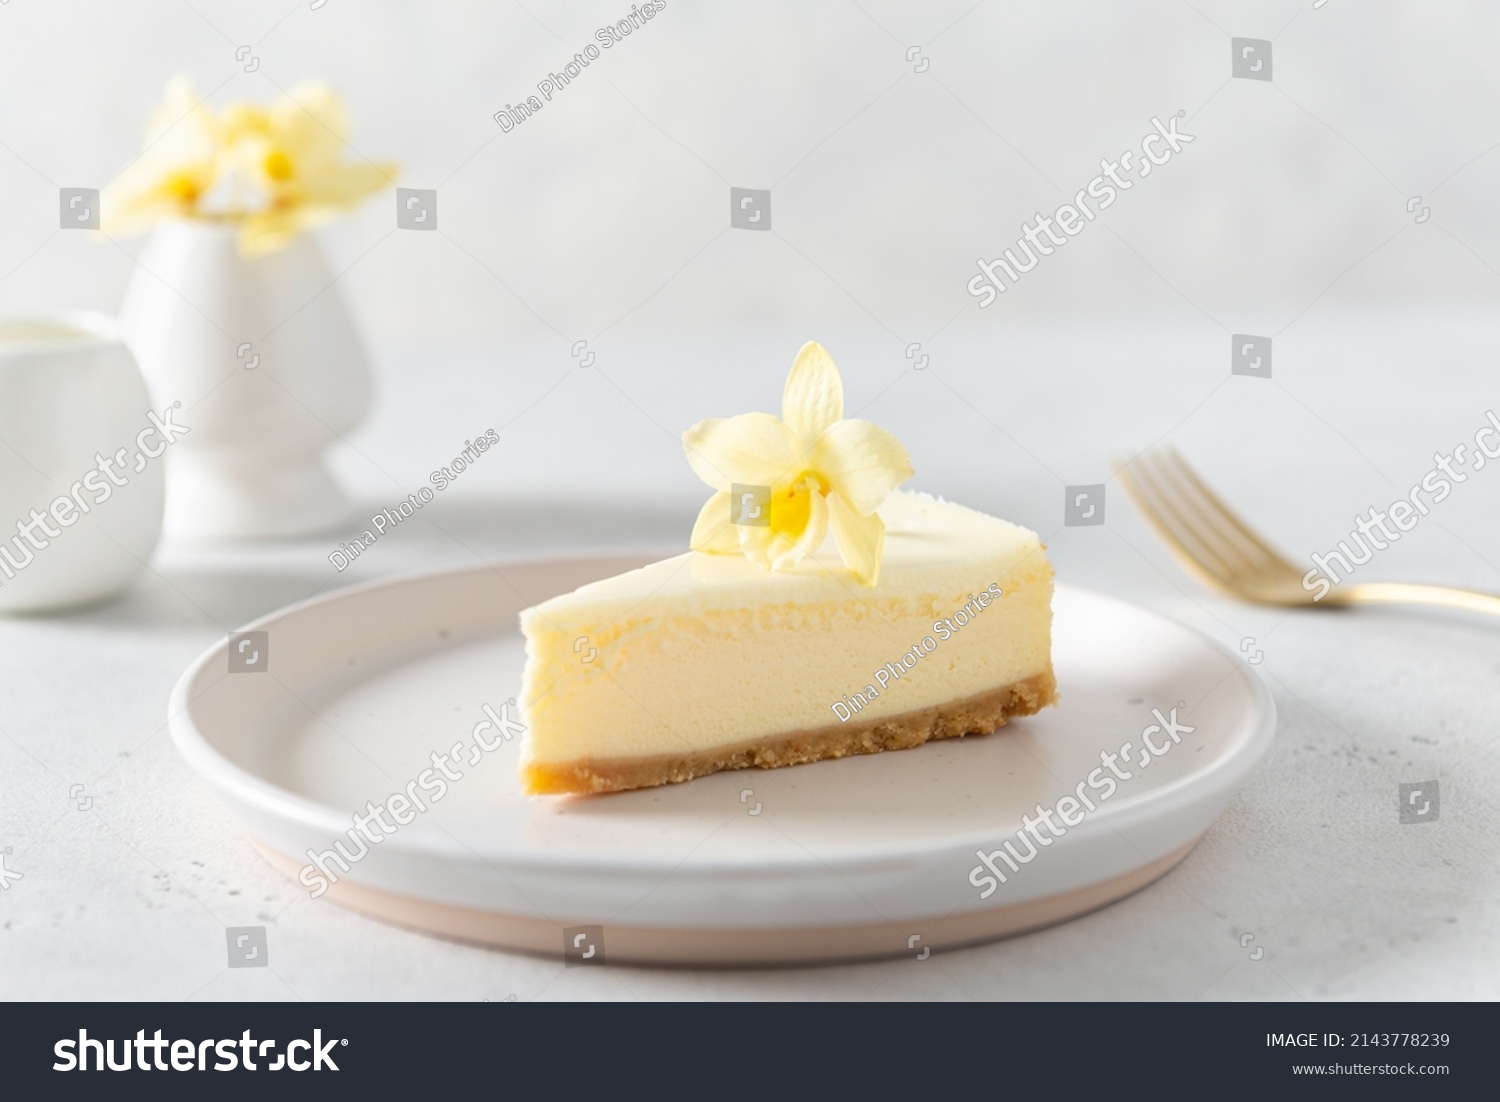 Classic New York cheesecake with fresh vanilla flower on a white concrete background, side view. A piece of Vanilla cheesecake on a white plate. Confectionery menu, recipe. Close up. #2143778239